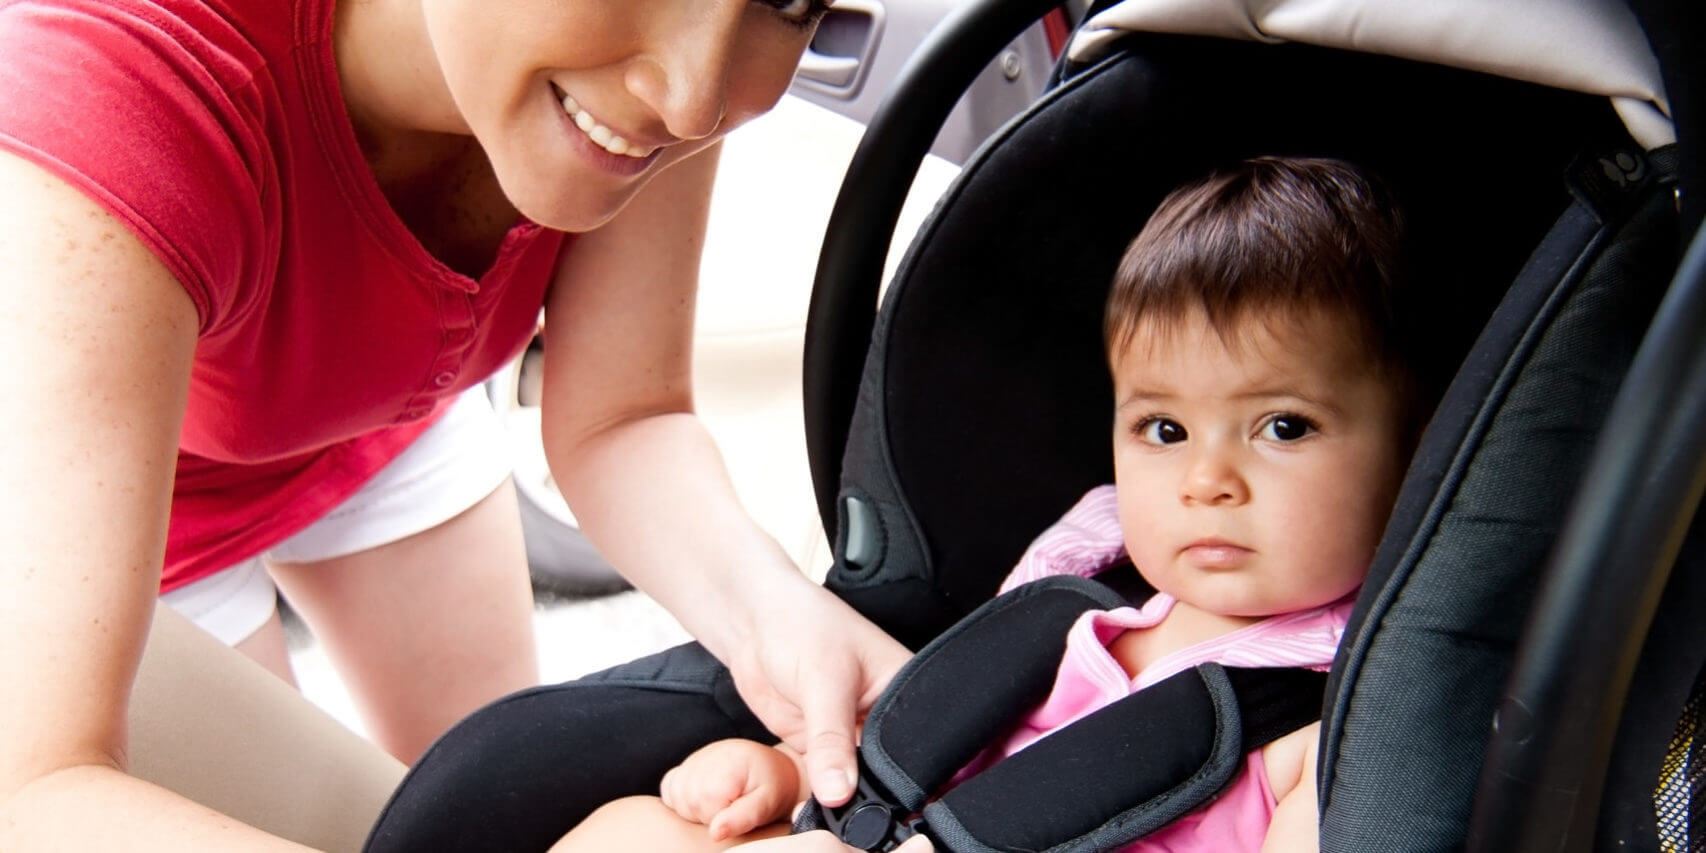 Mother putting her baby in a car seat